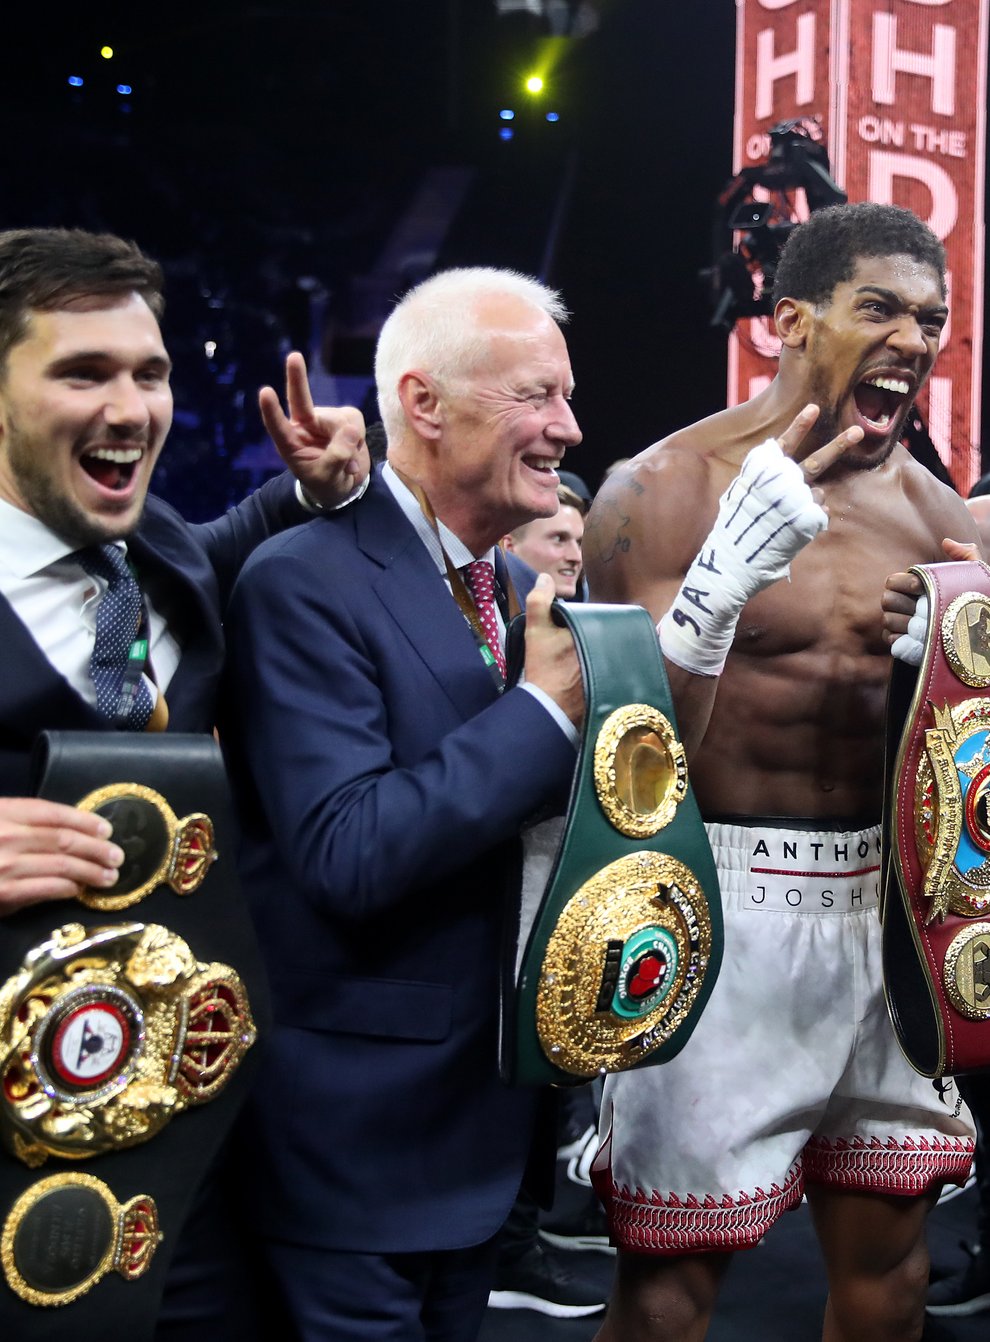 Joshua regained his world heavyweight titles in Saudi Arabia at the end of 2019 (PA Images)